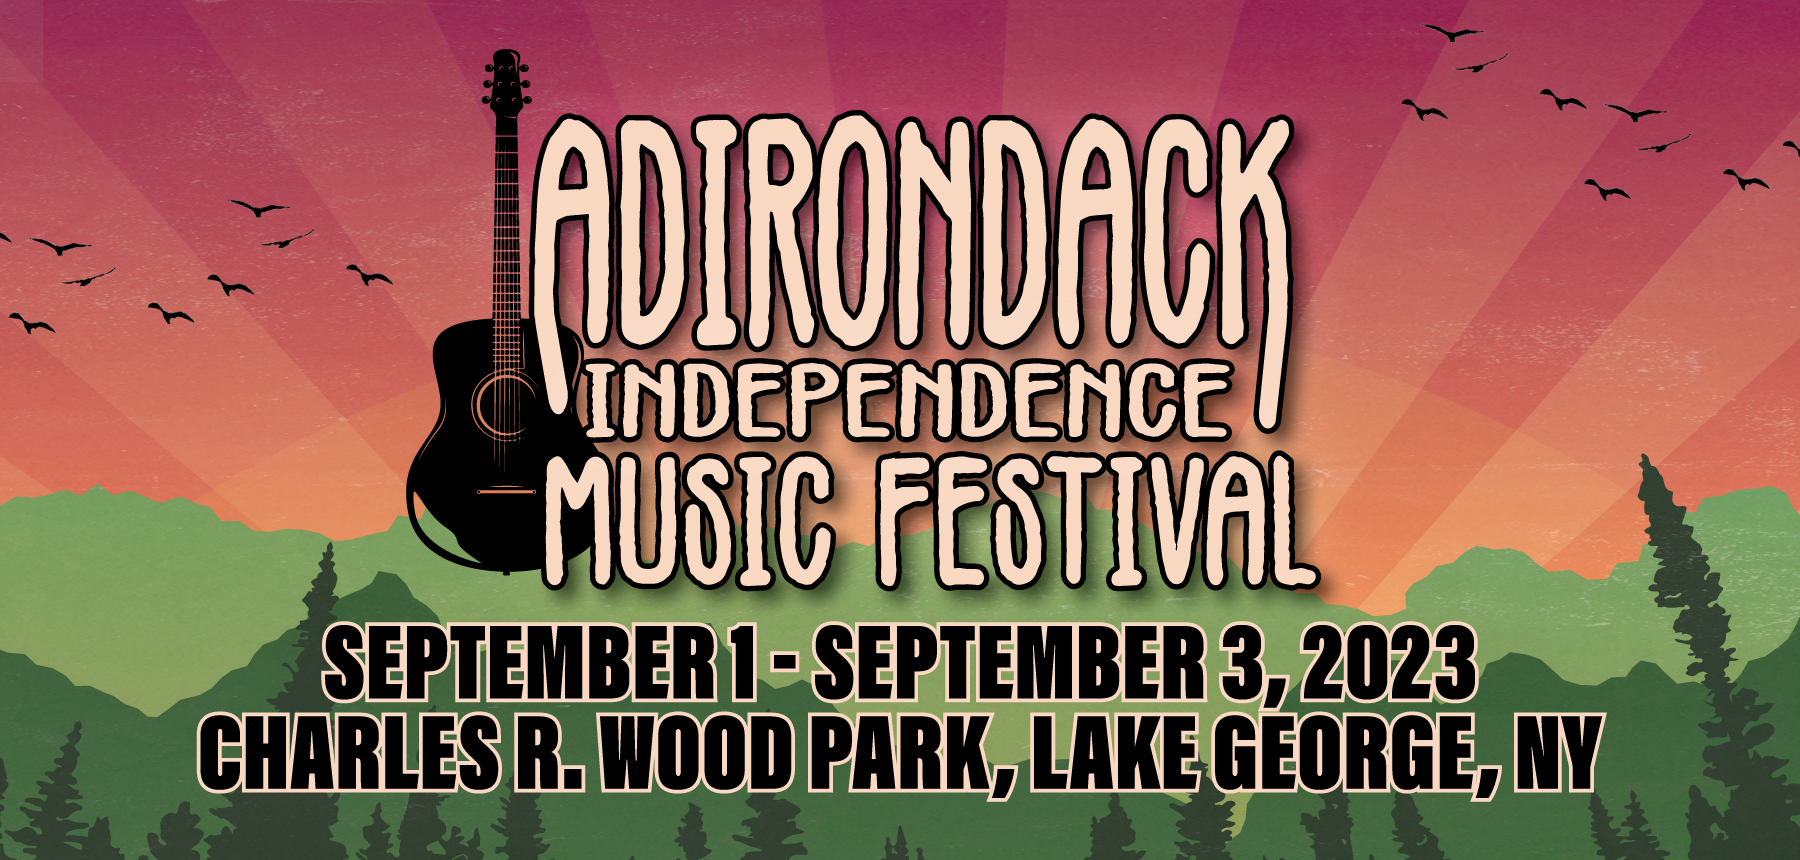 Save the Date: ADK Music Fest Sept. 1-3, 2023